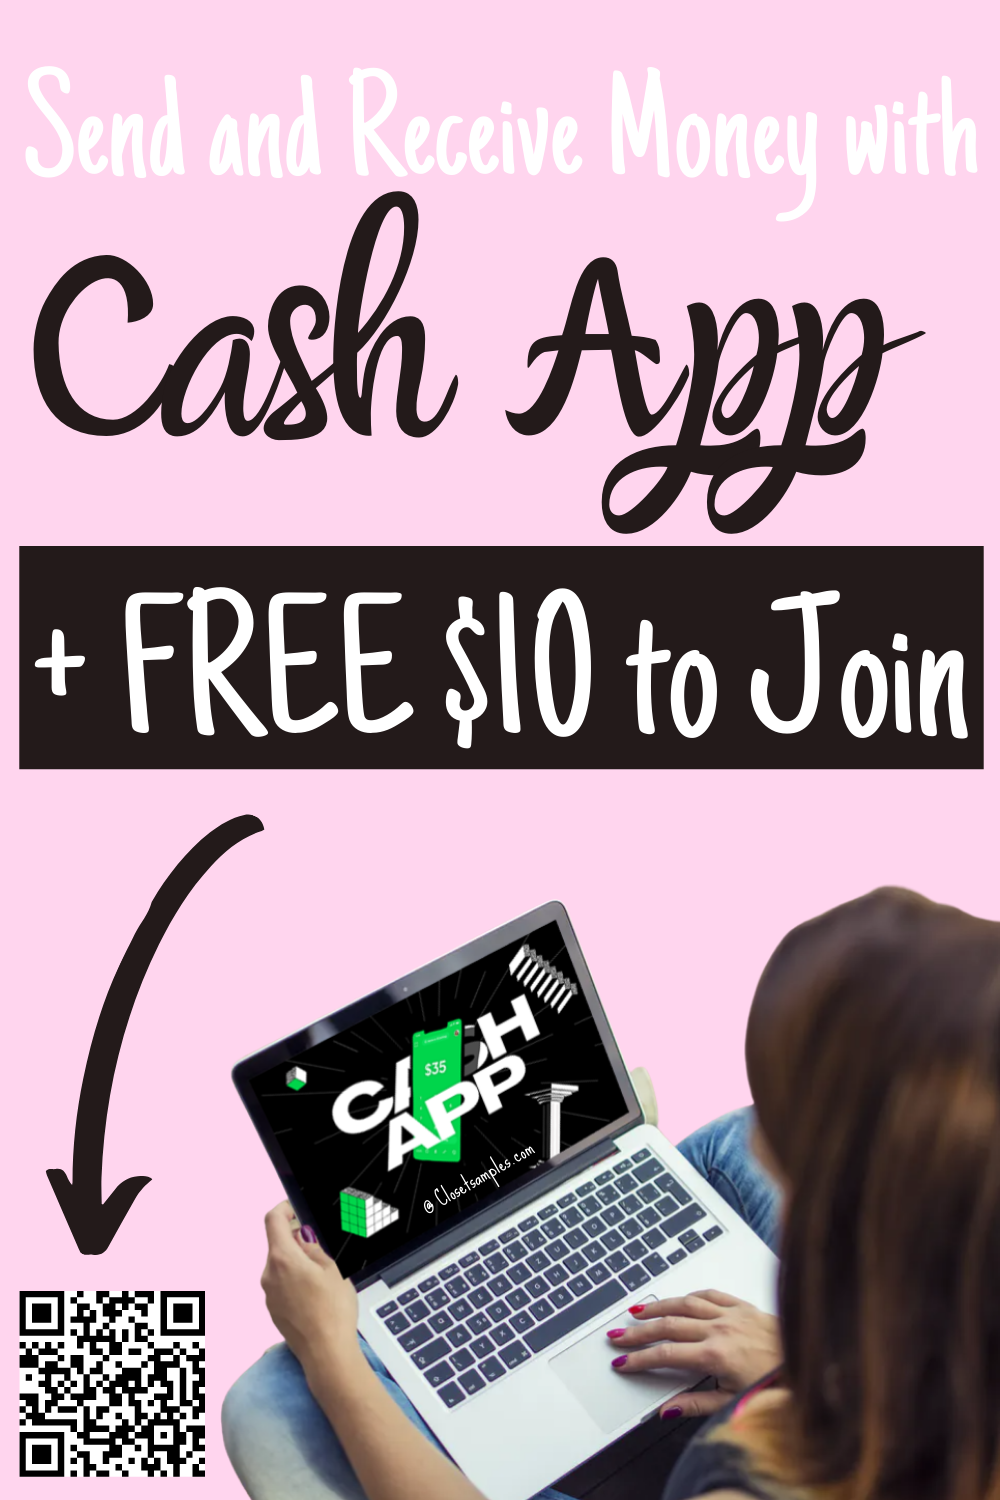 Send and Receive Money with Cash App and Get FREE Money